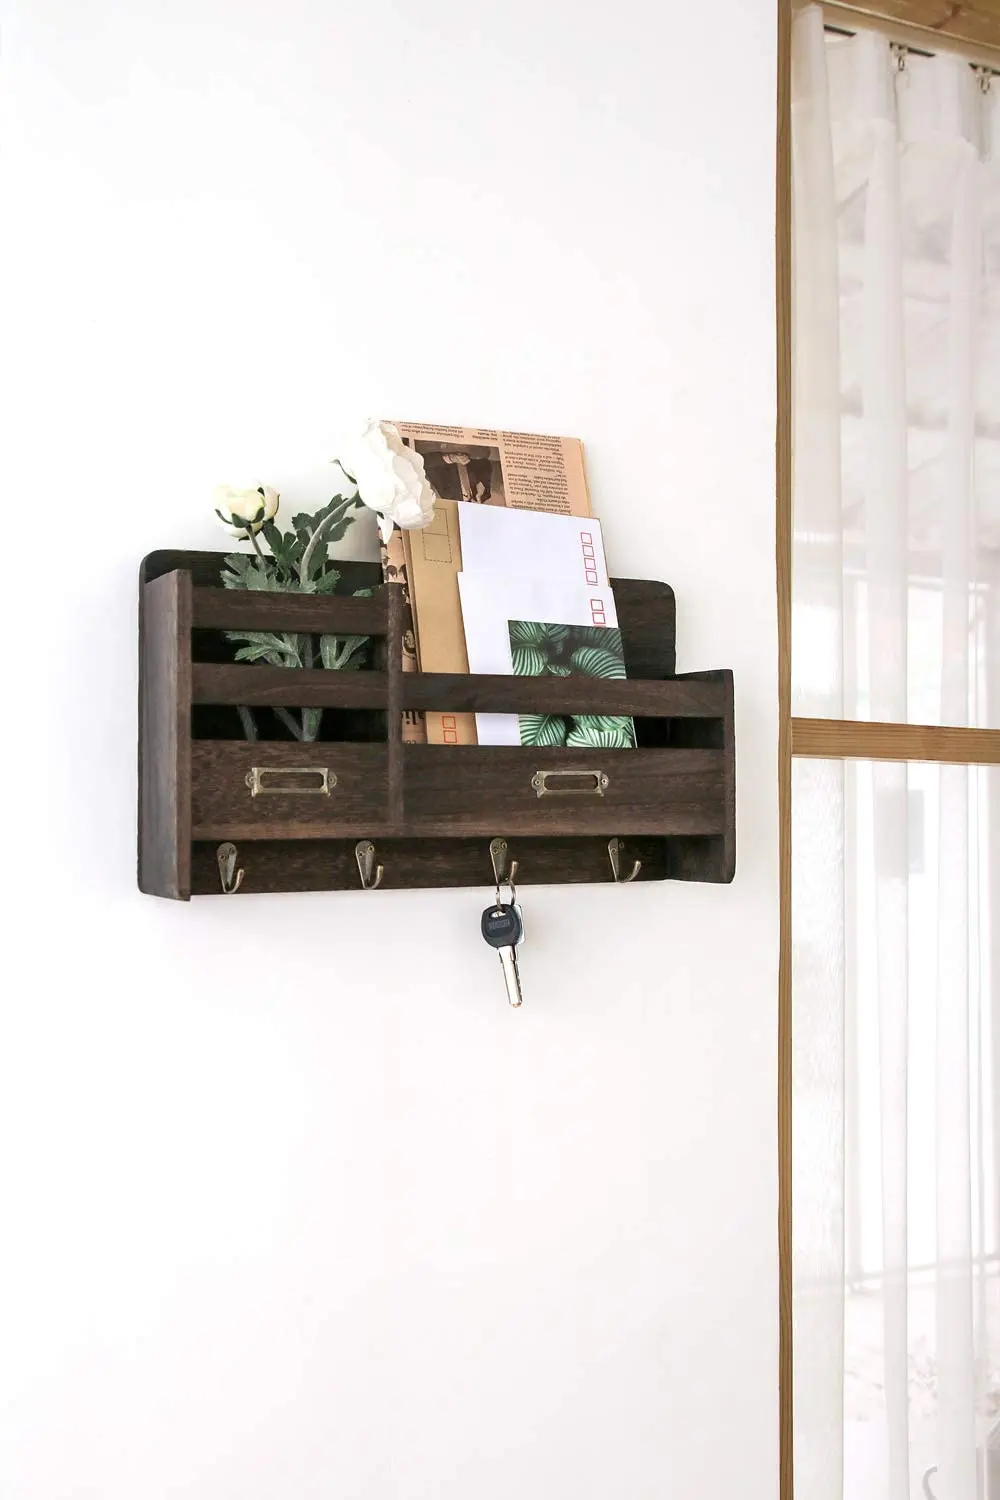 TQVAI Rustic Wood Mail Sorter with 4 Key Hooks Wall Mounted Mail Holder Letter Bills Organizer 